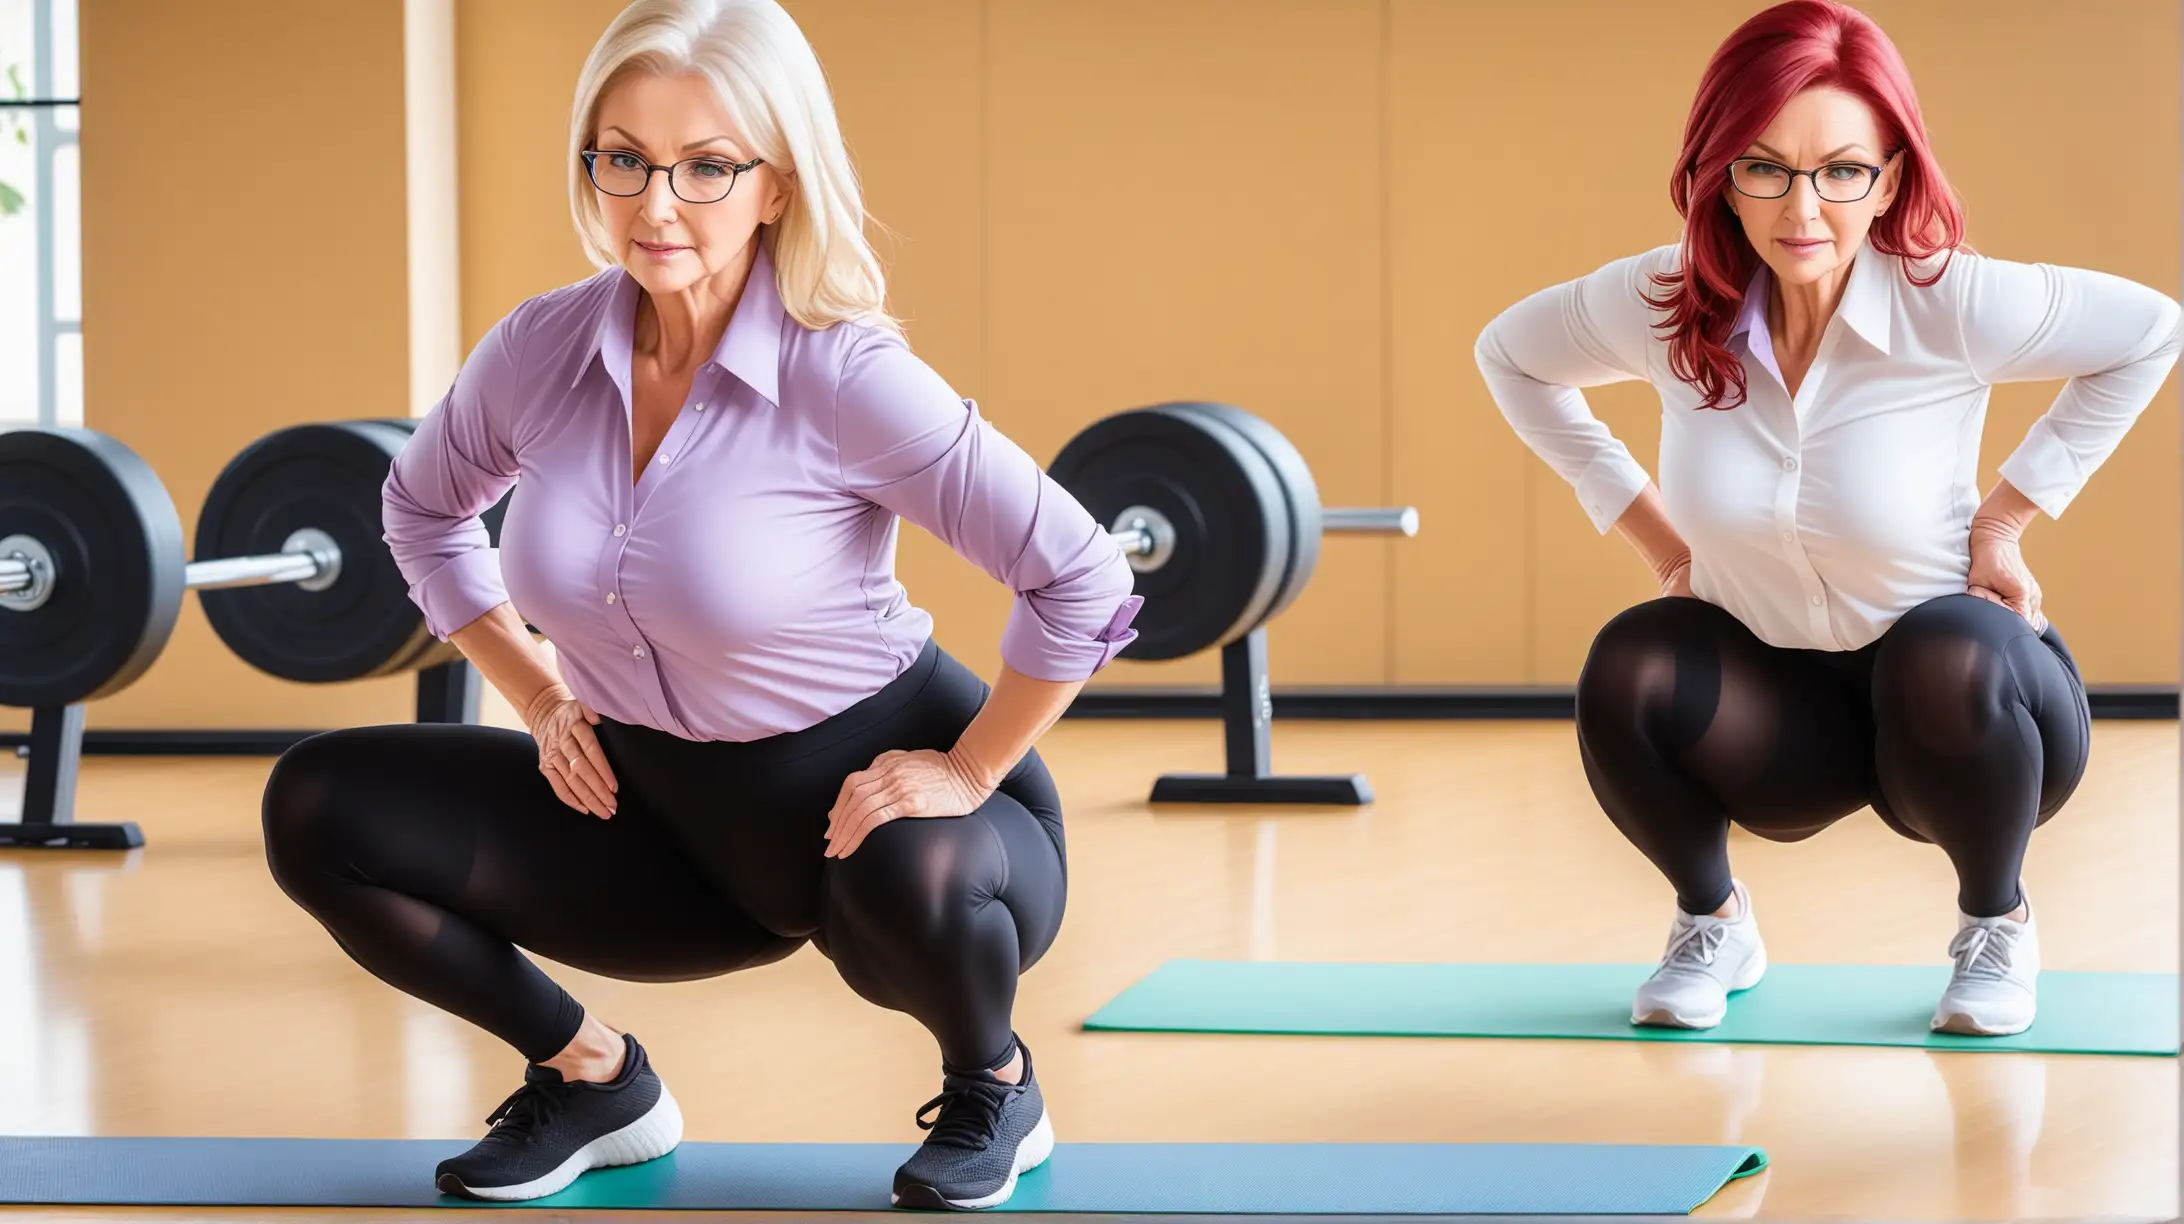 Two Mature Women Squatting Exercise in Tights and Button Shirts